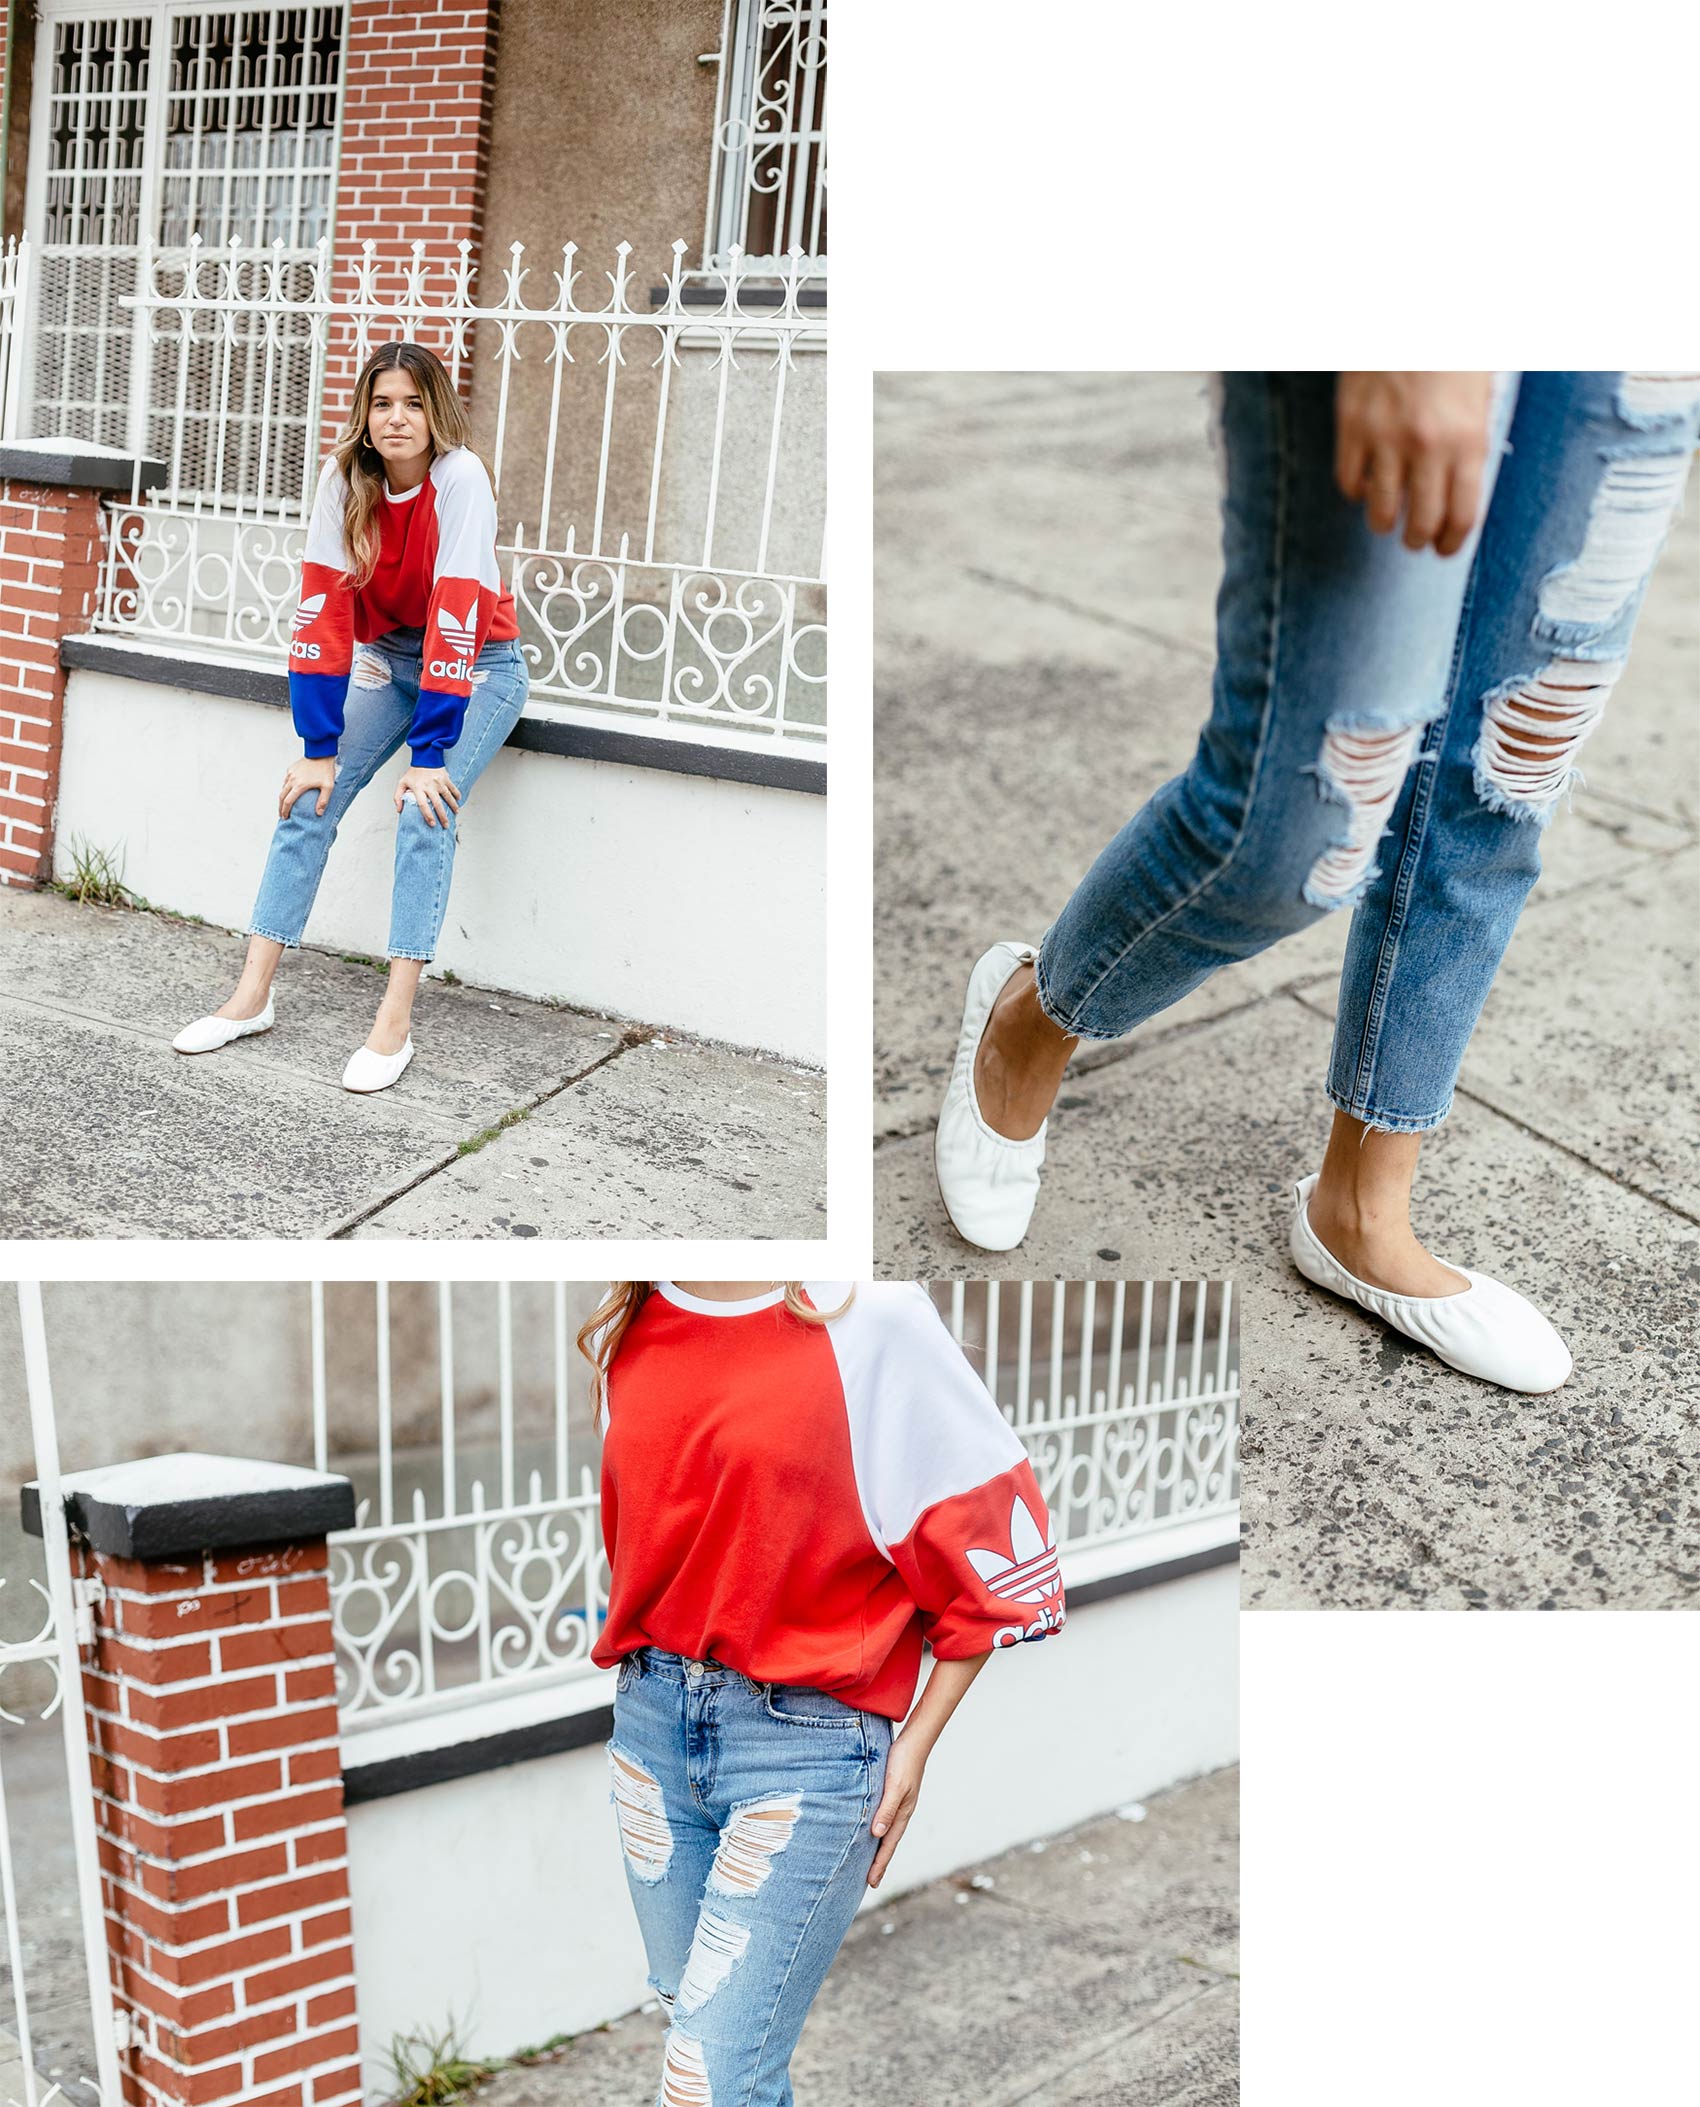 Outfit details: adidas red white and blue sweater, ripped Pull & Bear jeans, Céline white ballerina flat shoes